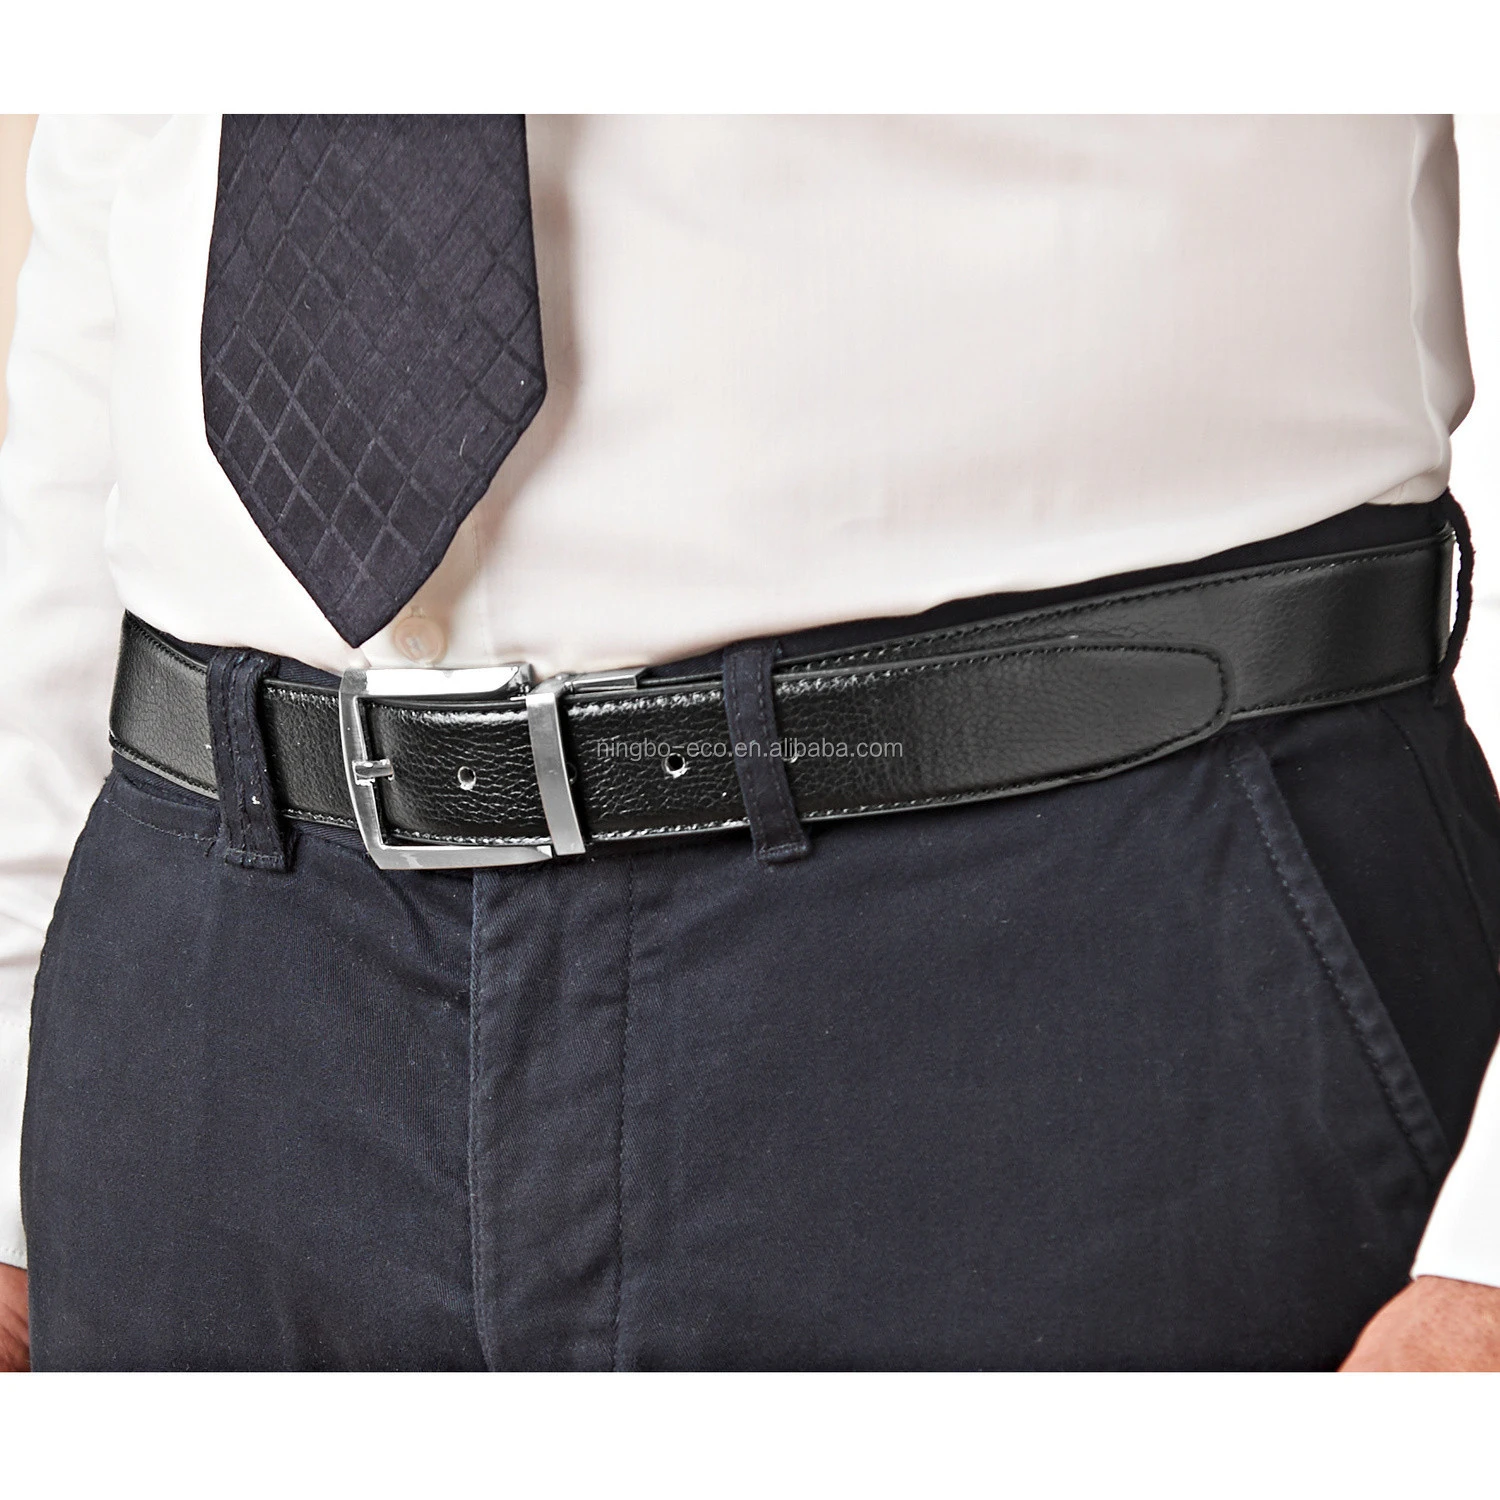 Fashion Business Style New Item Smooth 2 in 1 Double-sided Belt Genuine Leather Men Dress Belt